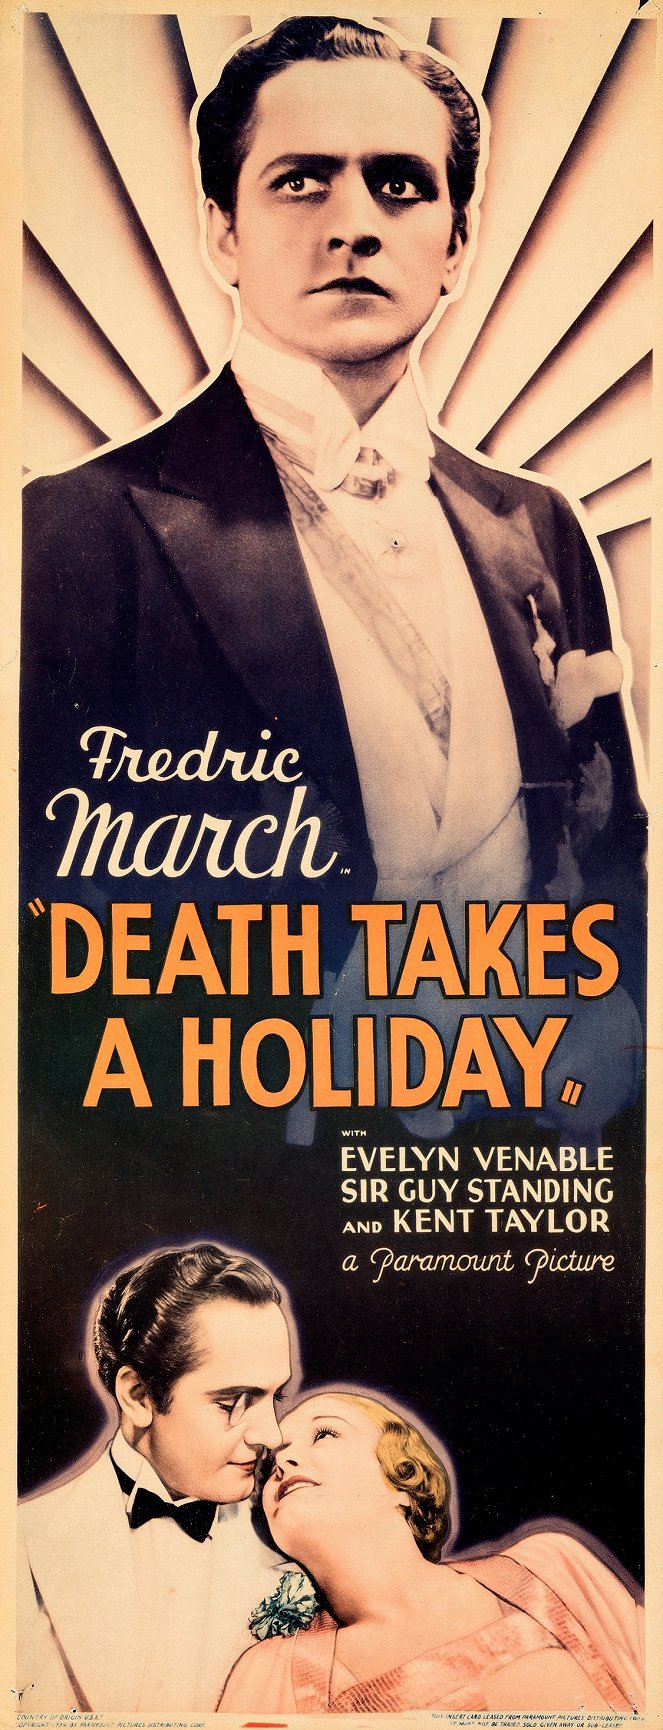 Death Takes a Holiday - Posters